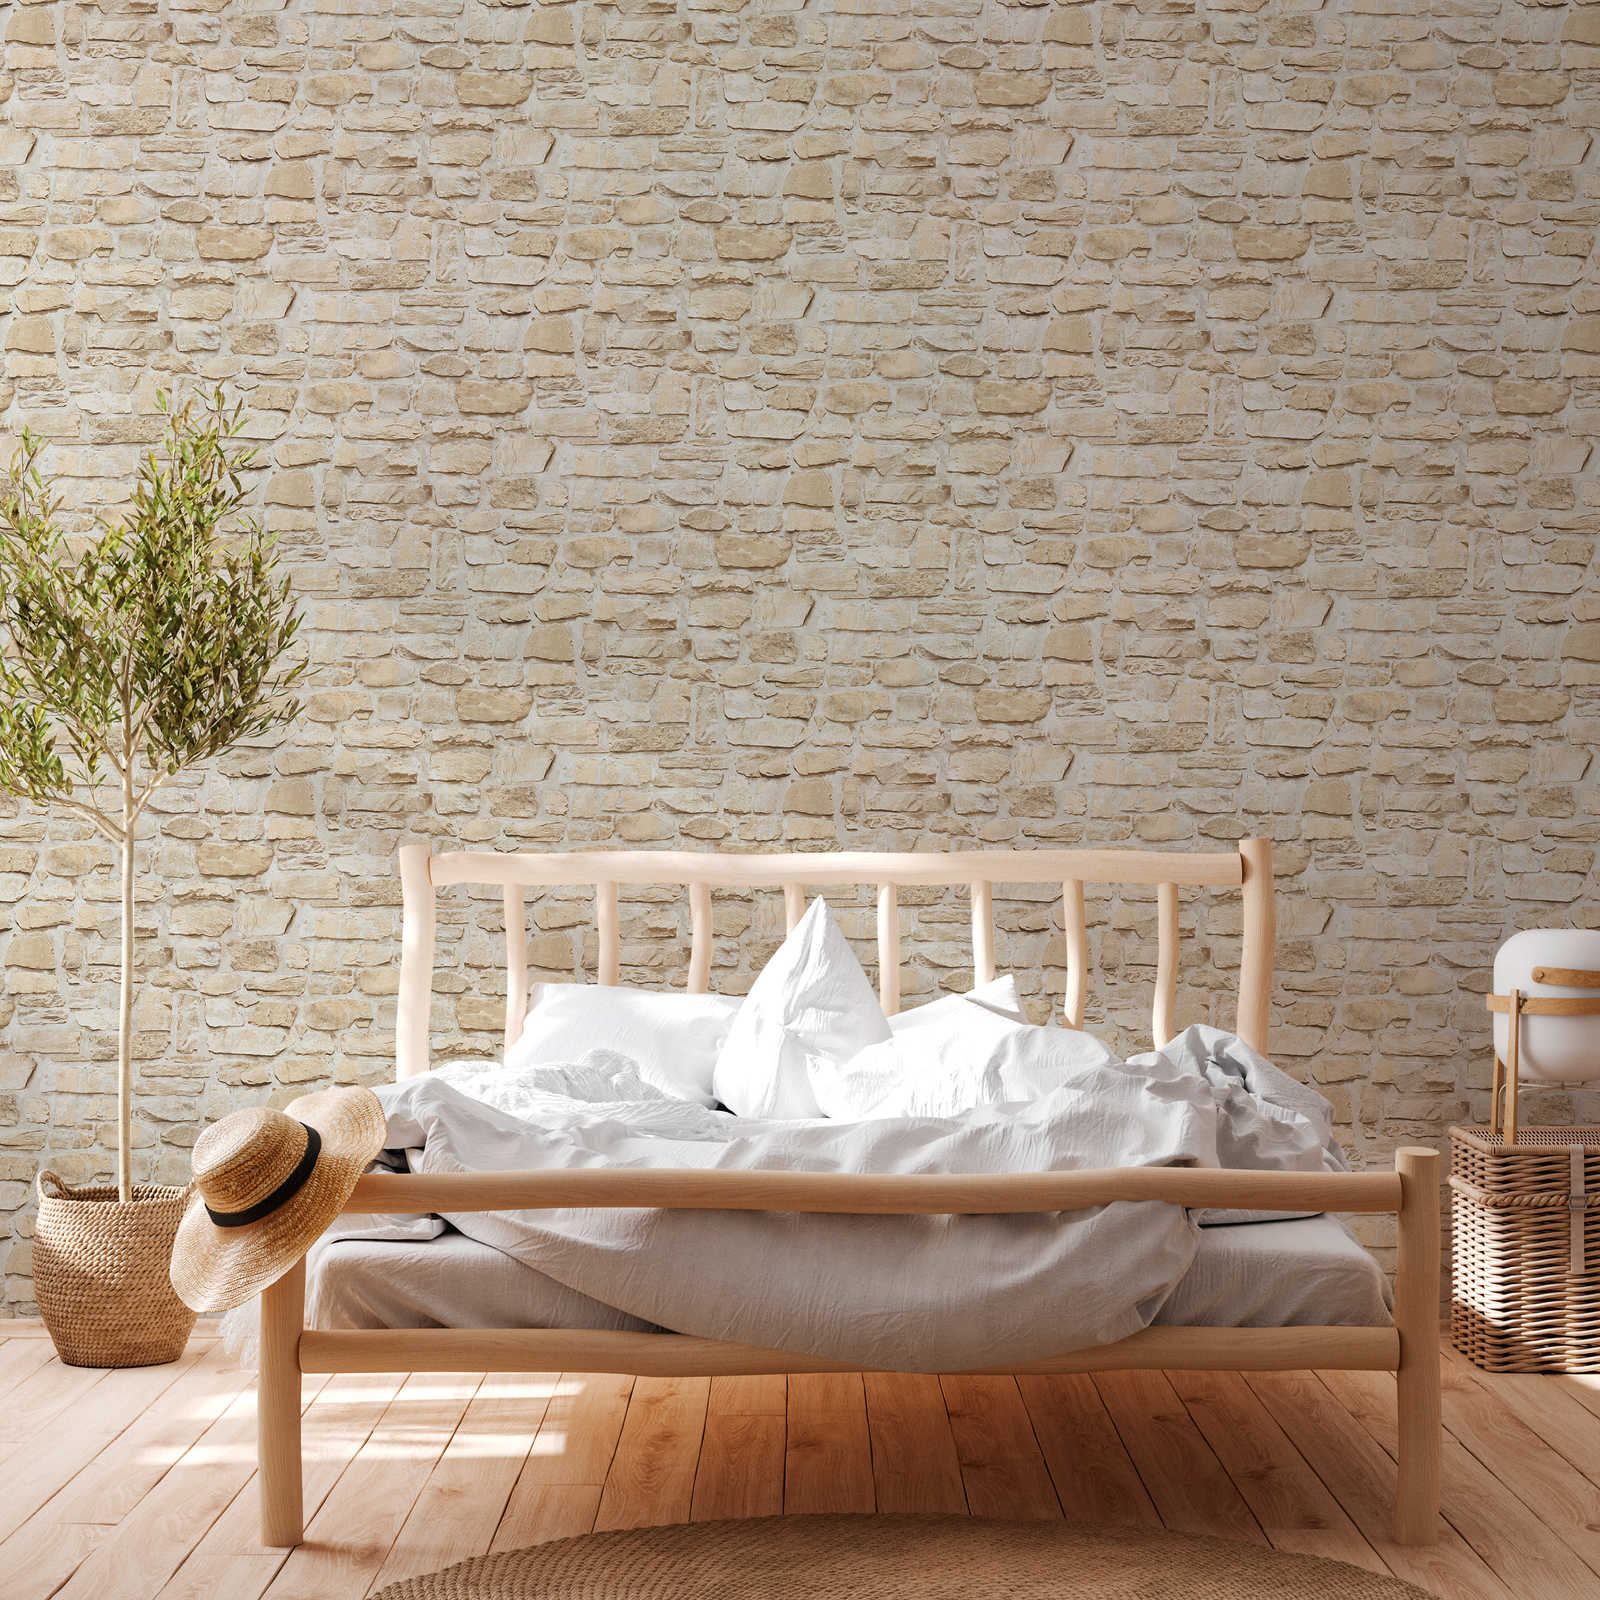             Self-adhesive wallpaper | natural stone wall in 3D look - beige
        